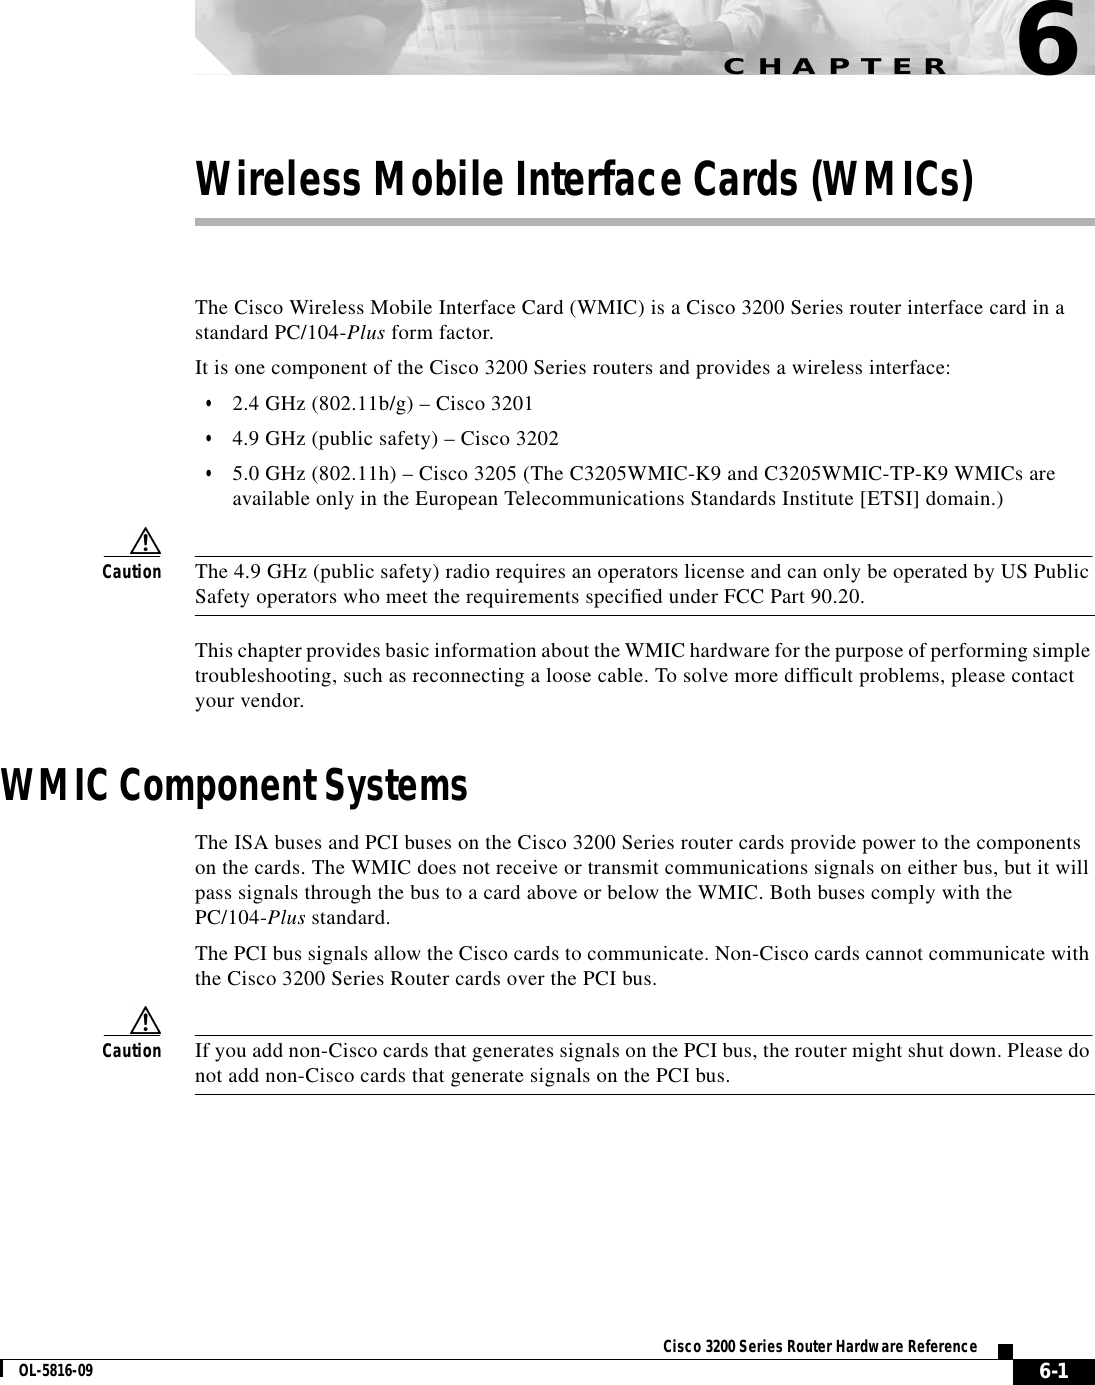 CHAPTER6-1Cisco 3200 Series Router Hardware ReferenceOL-5816-096Wireless Mobile Interface Cards (WMICs)The Cisco Wireless Mobile Interface Card (WMIC) is a Cisco 3200 Series router interface card in astandard PC/104-Plus form factor.It is one component of the Cisco 3200 Series routers and provides a wireless interface:•2.4 GHz (802.11b/g) – Cisco 3201•4.9 GHz (public safety) – Cisco 3202•5.0 GHz (802.11h) – Cisco 3205 (The C3205WMIC-K9 and C3205WMIC-TP-K9 WMICs areavailable only in the European Telecommunications Standards Institute [ETSI] domain.)Caution The 4.9 GHz (public safety) radio requires an operators license and can only be operated by US PublicSafety operators who meet the requirements specified under FCC Part 90.20.This chapter provides basic information about the WMIC hardware for the purpose of performing simpletroubleshooting, such as reconnecting a loose cable. To solve more difficult problems, please contactyour vendor.WMIC Component SystemsThe ISA buses and PCI buses on the Cisco 3200 Series router cards provide power to the componentson the cards. The WMIC does not receive or transmit communications signals on either bus, but it willpass signals through the bus to a card above or below the WMIC. Both buses comply with thePC/104-Plus standard.The PCI bus signals allow the Cisco cards to communicate. Non-Cisco cards cannot communicate withthe Cisco 3200 Series Router cards over the PCI bus.Caution If you add non-Cisco cards that generates signals on the PCI bus, the router might shut down. Please donot add non-Cisco cards that generate signals on the PCI bus.